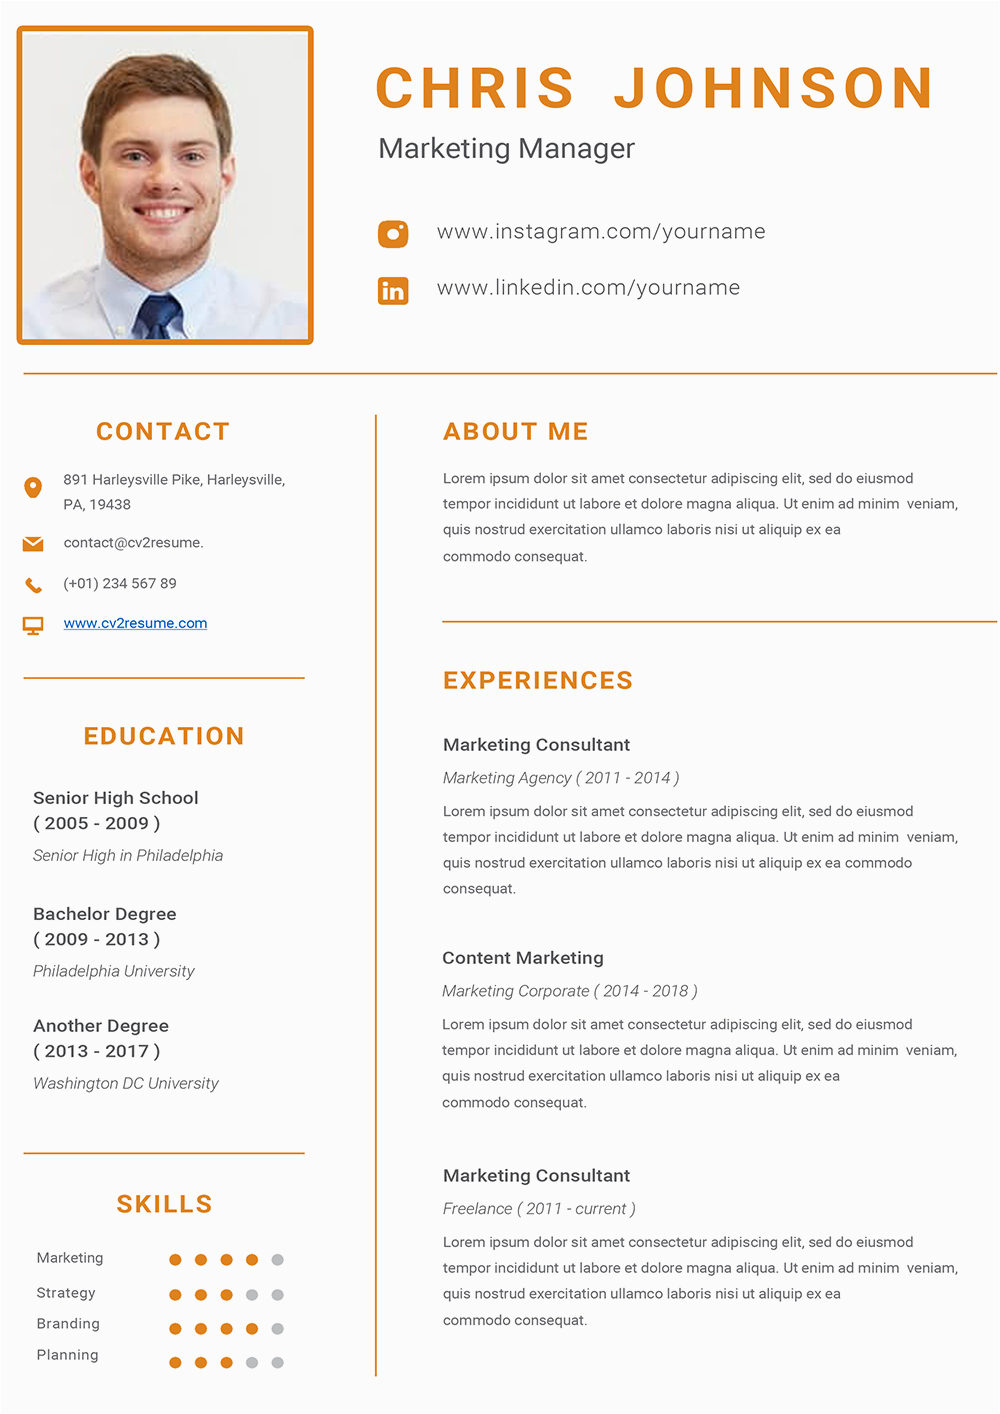 Professional Resume Design Templates Free Download top Clean Professional Resume Template Word format to Download